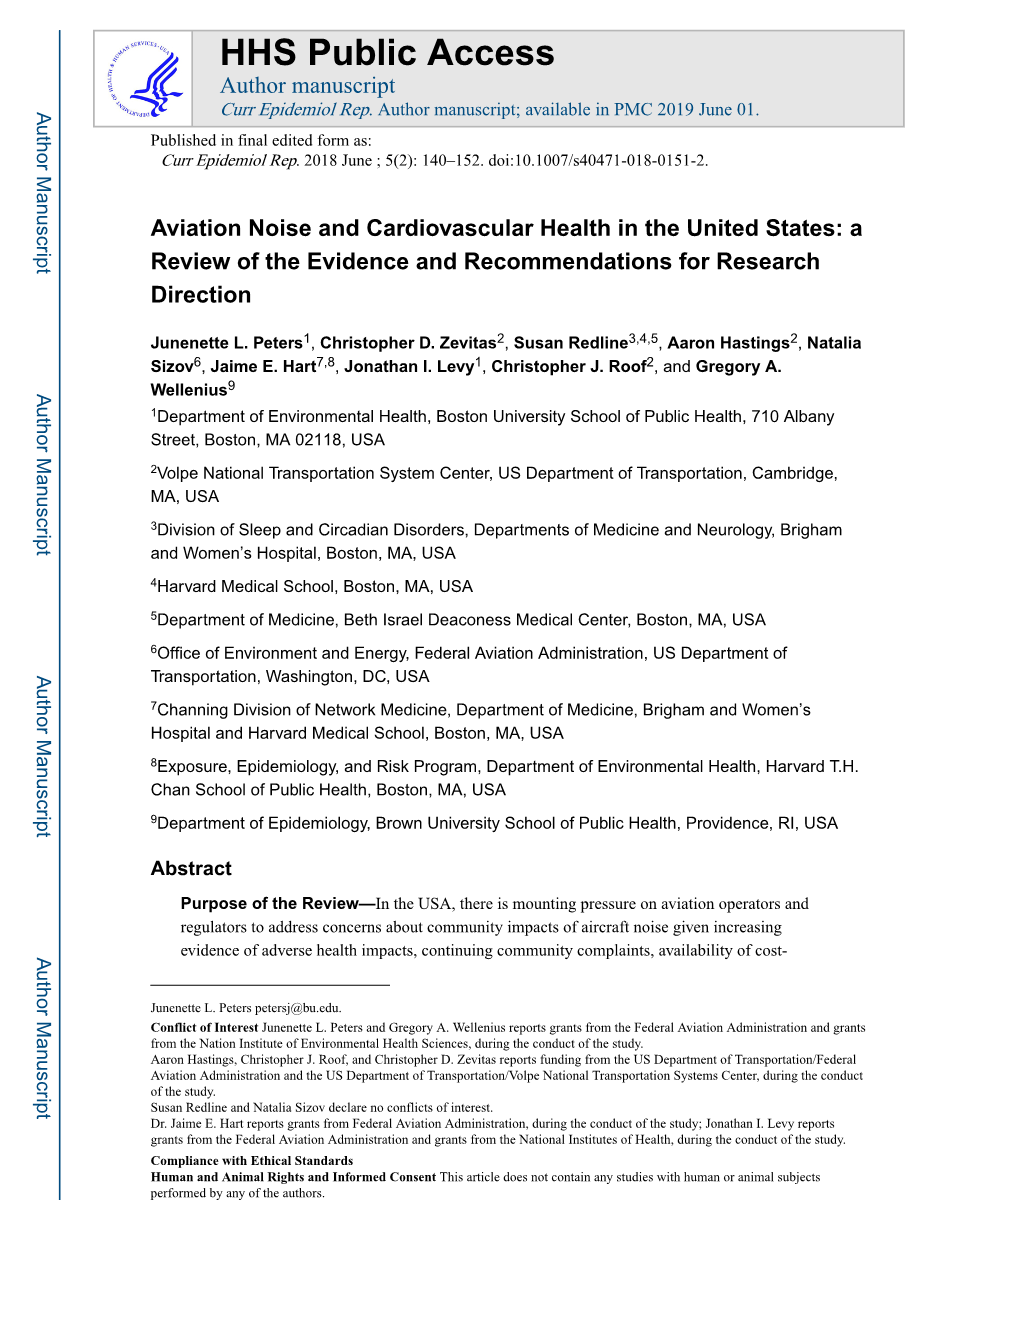 Aviation Noise and Cardiovascular Health in the United States: a Review of the Evidence and Recommendations for Research Direction